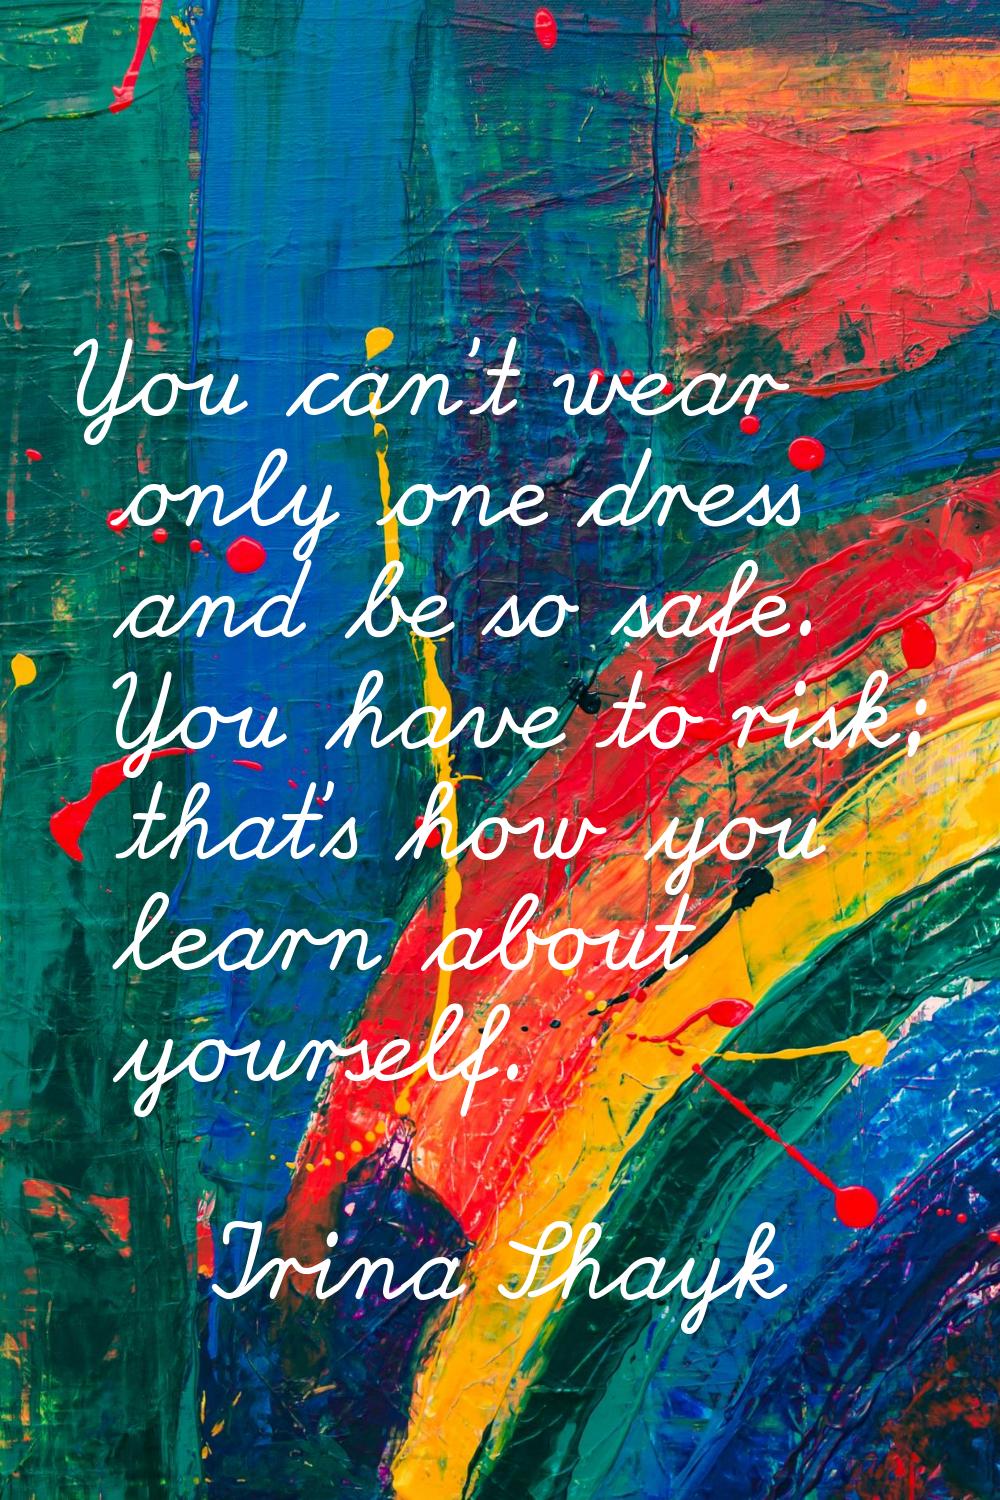 You can't wear only one dress and be so safe. You have to risk; that's how you learn about yourself